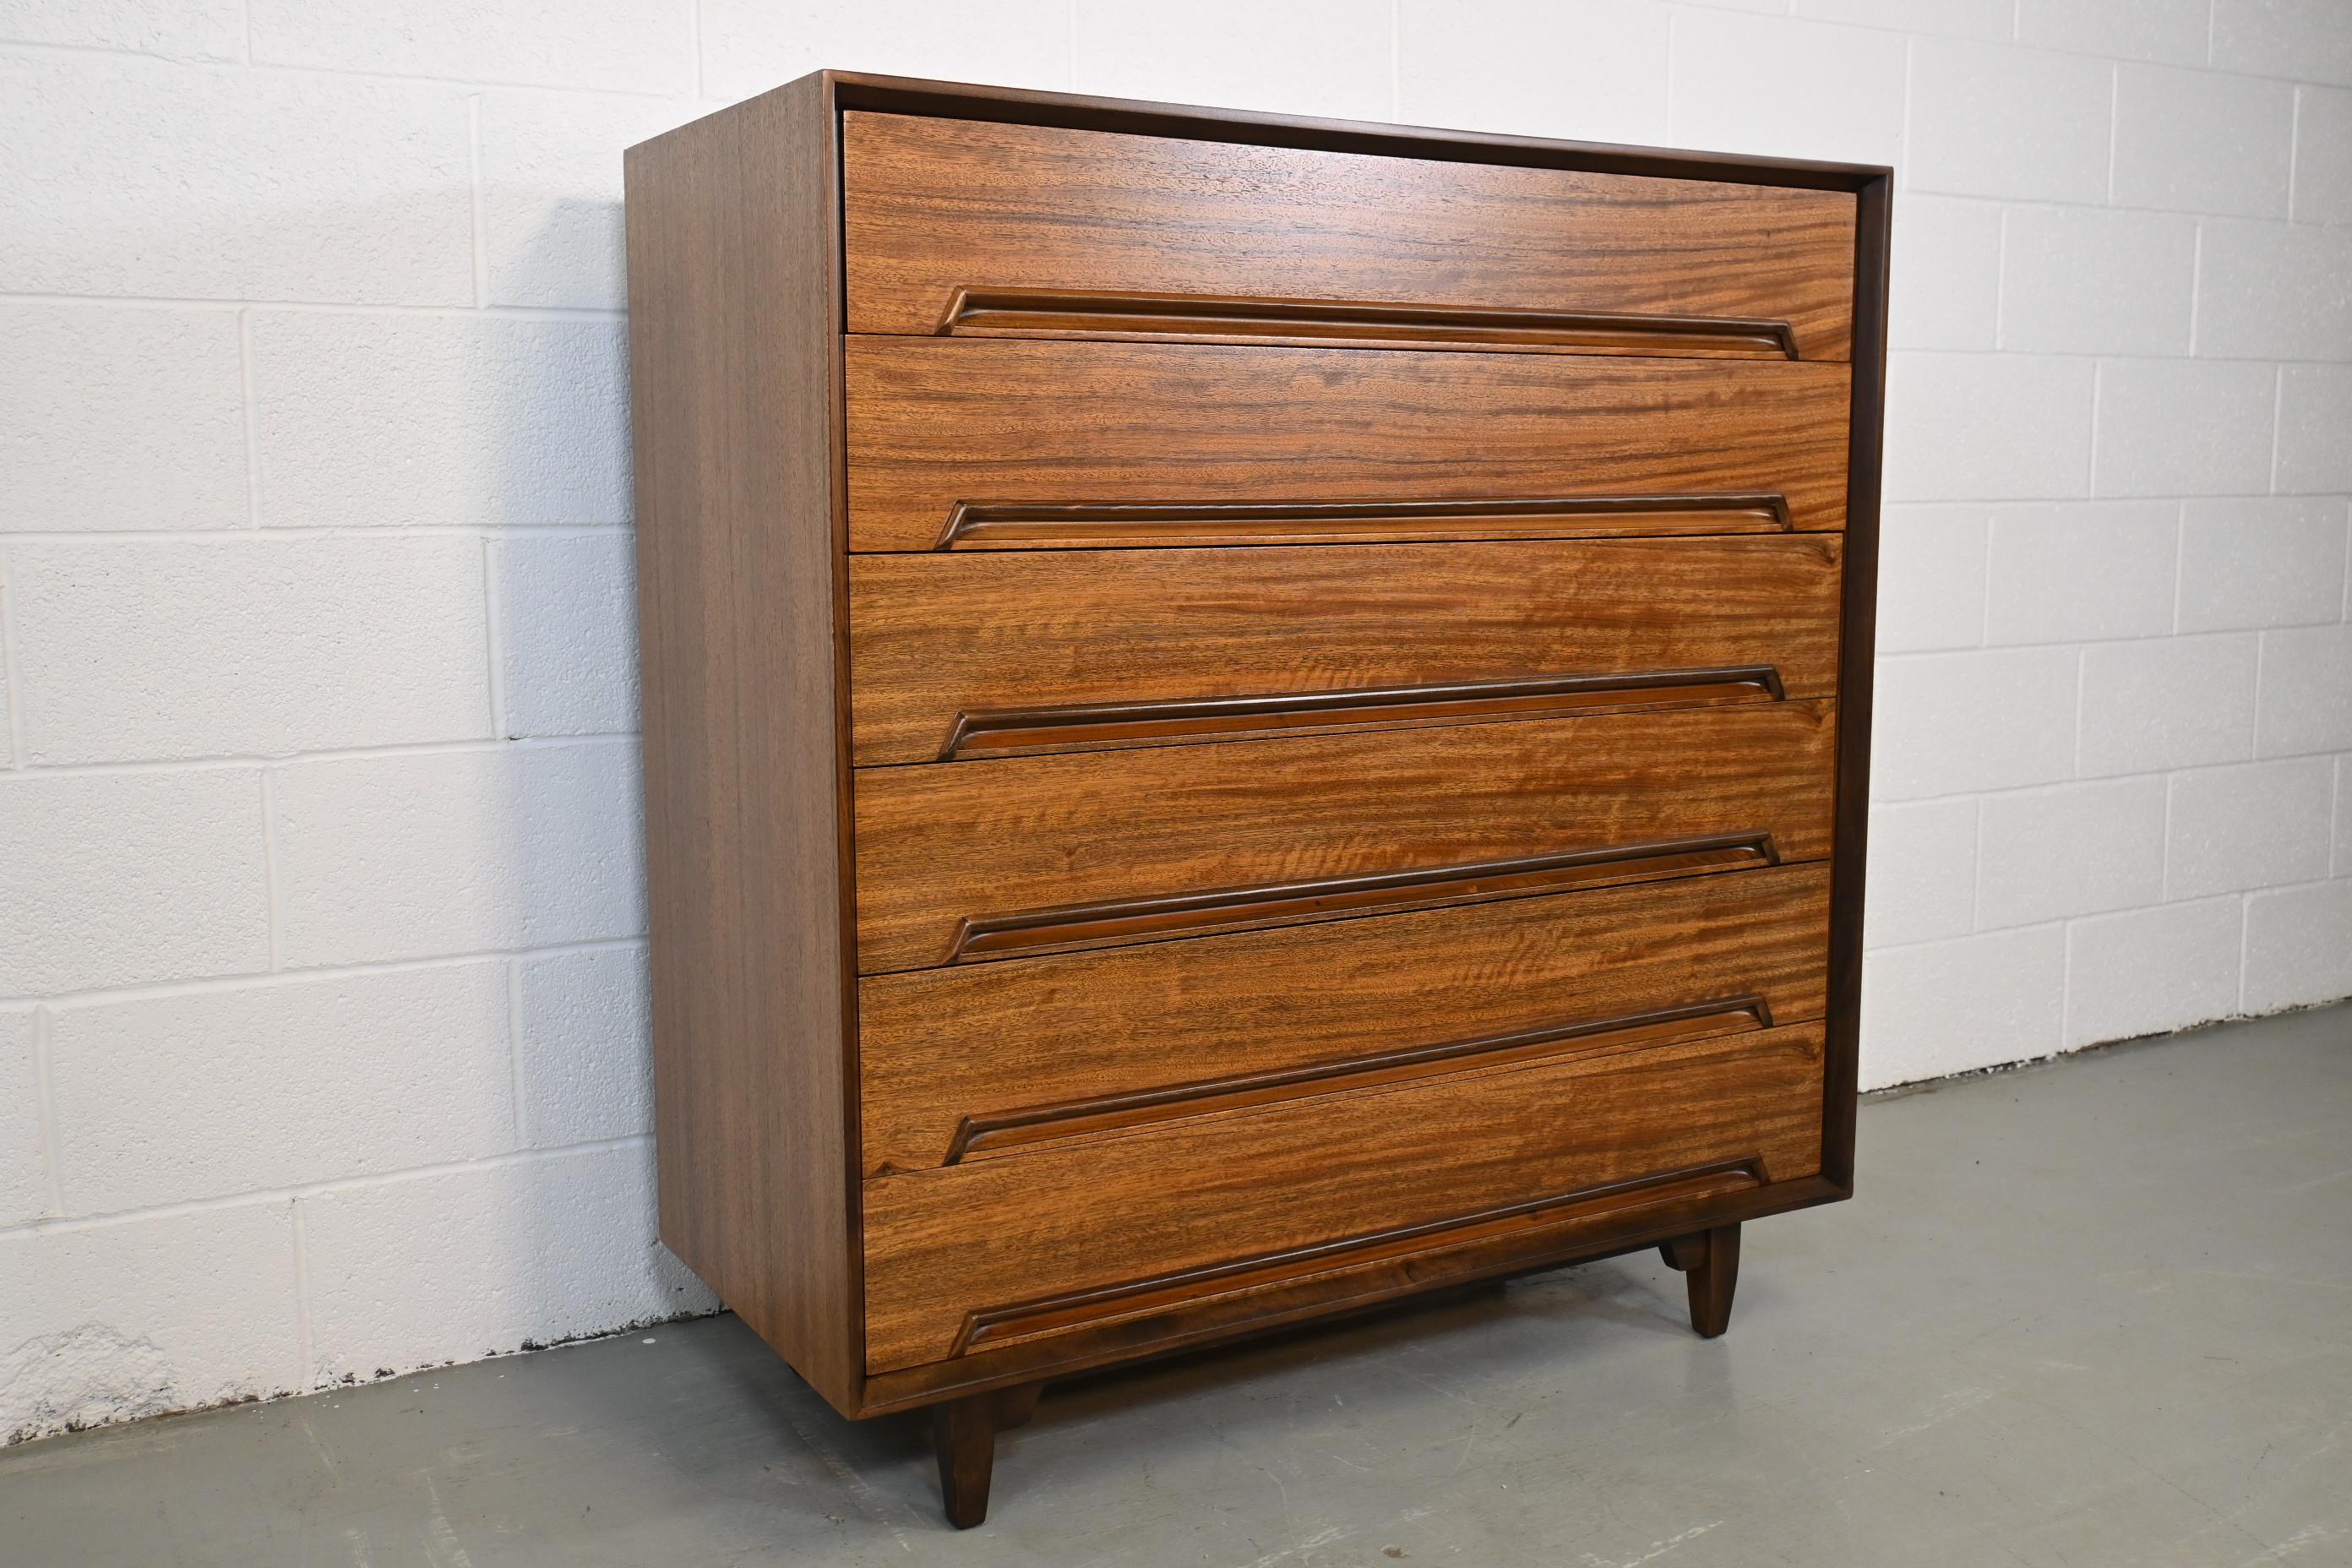 Milo Baughman for Drexel Perspective Mid-Century Modern highboy.

Drexel, USA, 1950s.

Measures: 42 wide x 19 deep x 45.13 high.

Mid-Century Modern Mindoro wood six drawer highboy.

Professionally Refinished. Excellent condition.